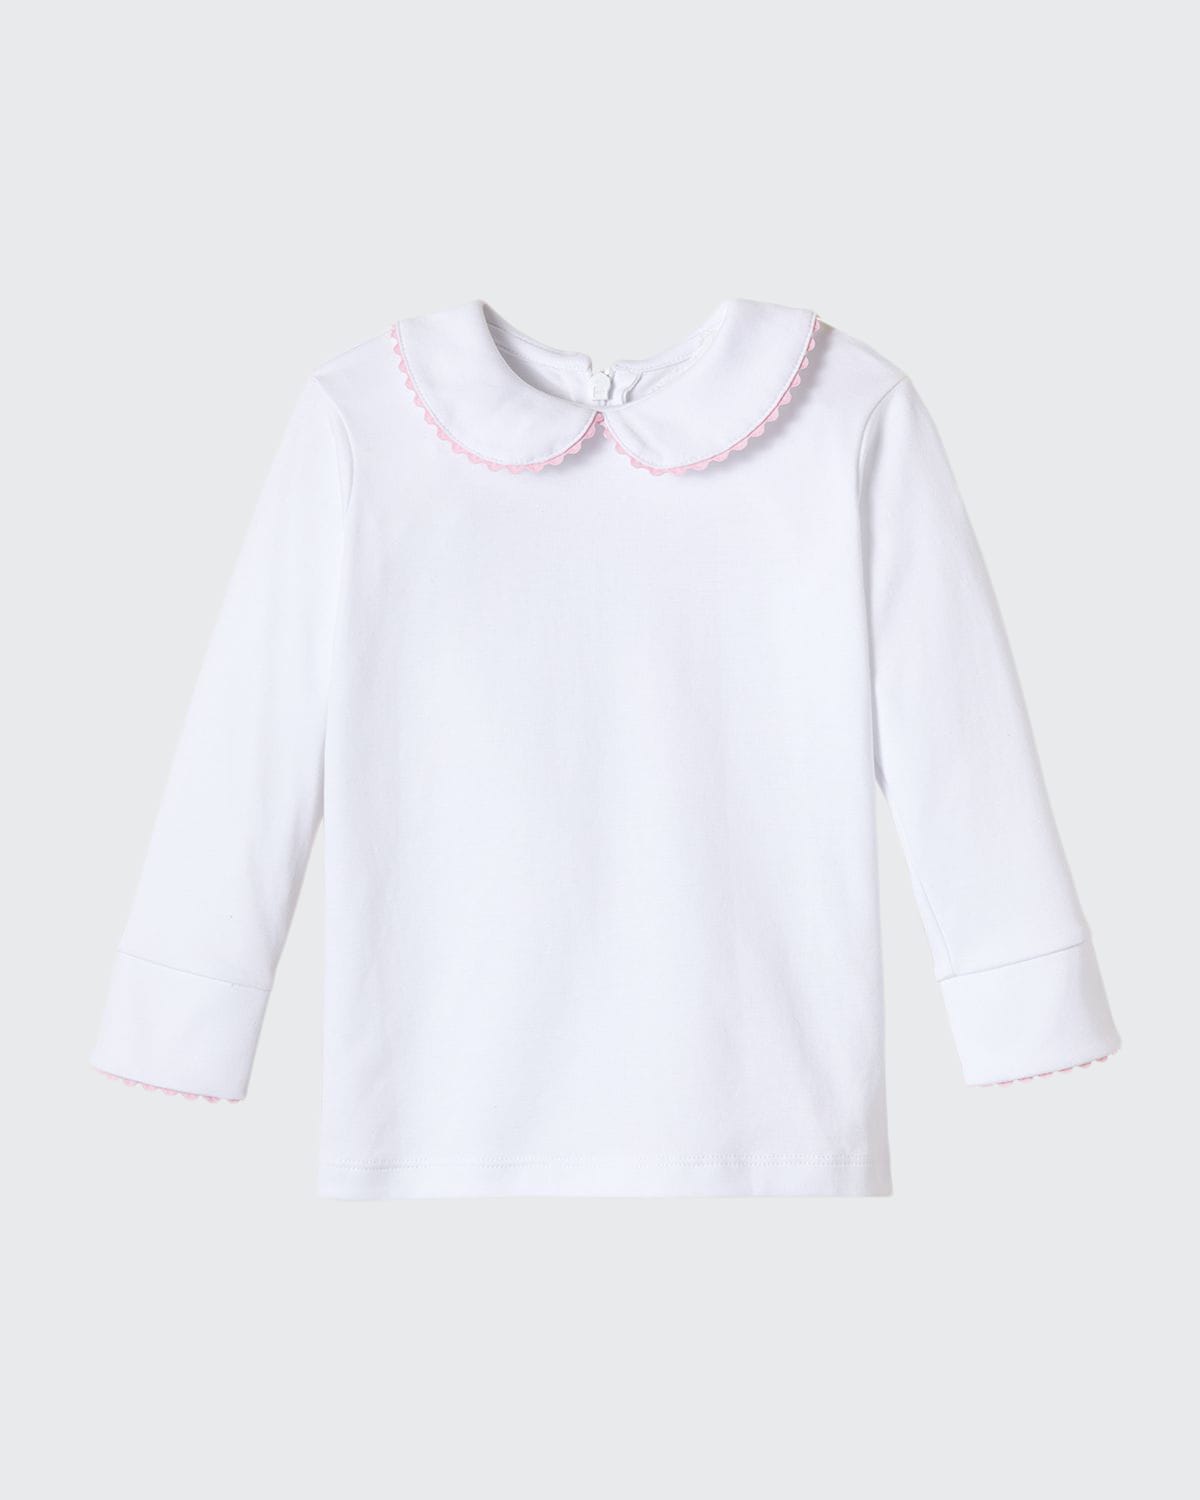 Classic Prep Childrenswear Girl's Isabelle Scallop-Trim Shirt, Size 3 Months-8